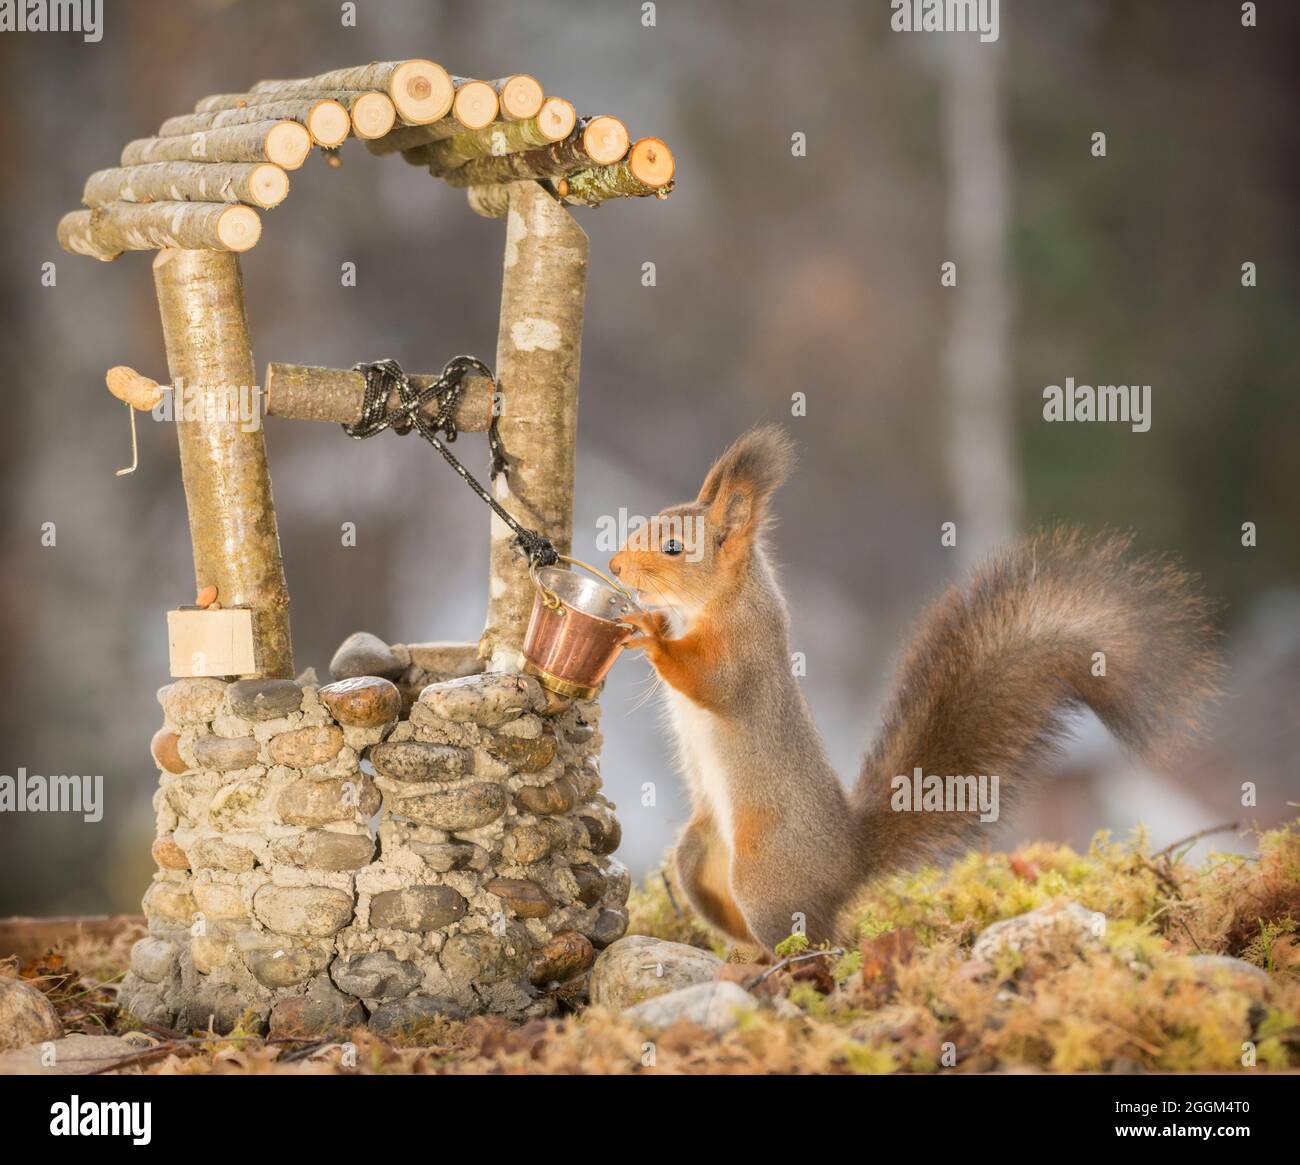 squirrel standing with a Wishing Well Stock Photo